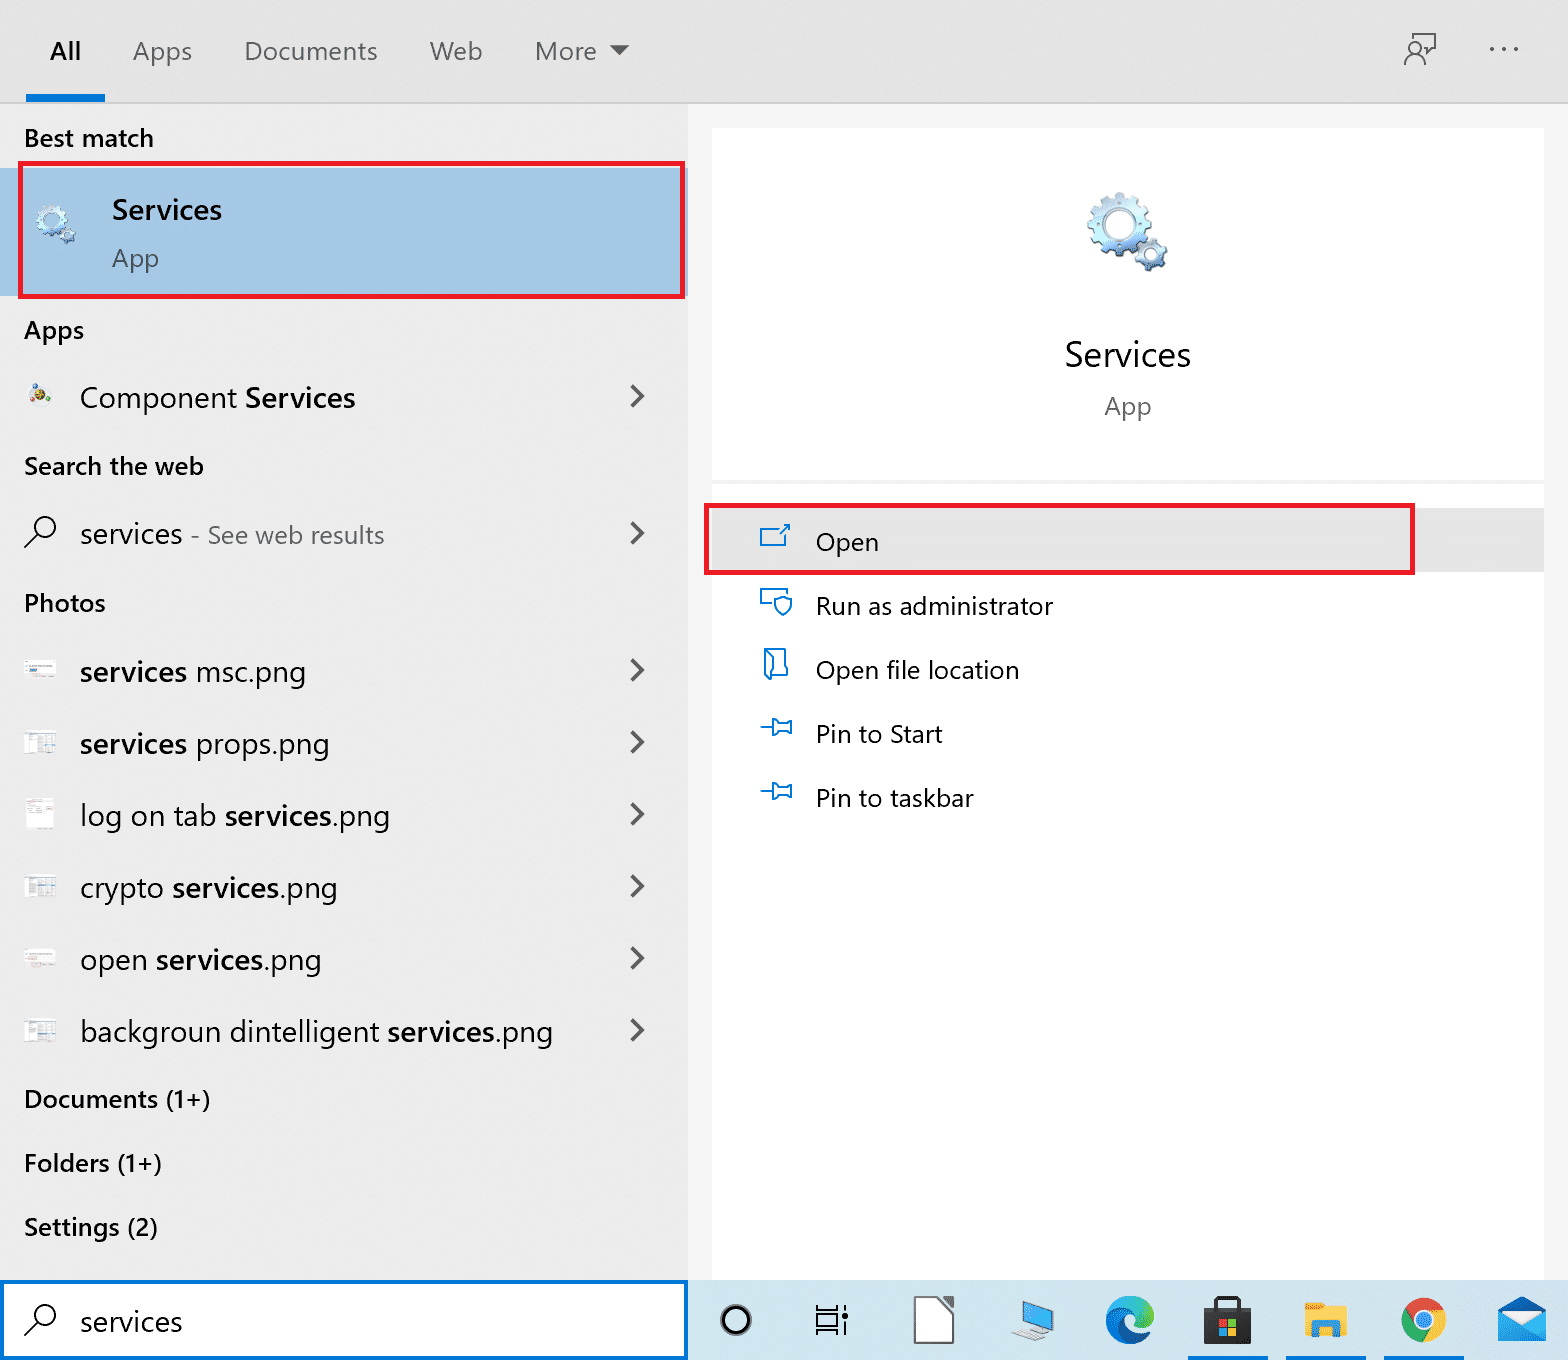 Type Services in the Windows search bar and launch the app